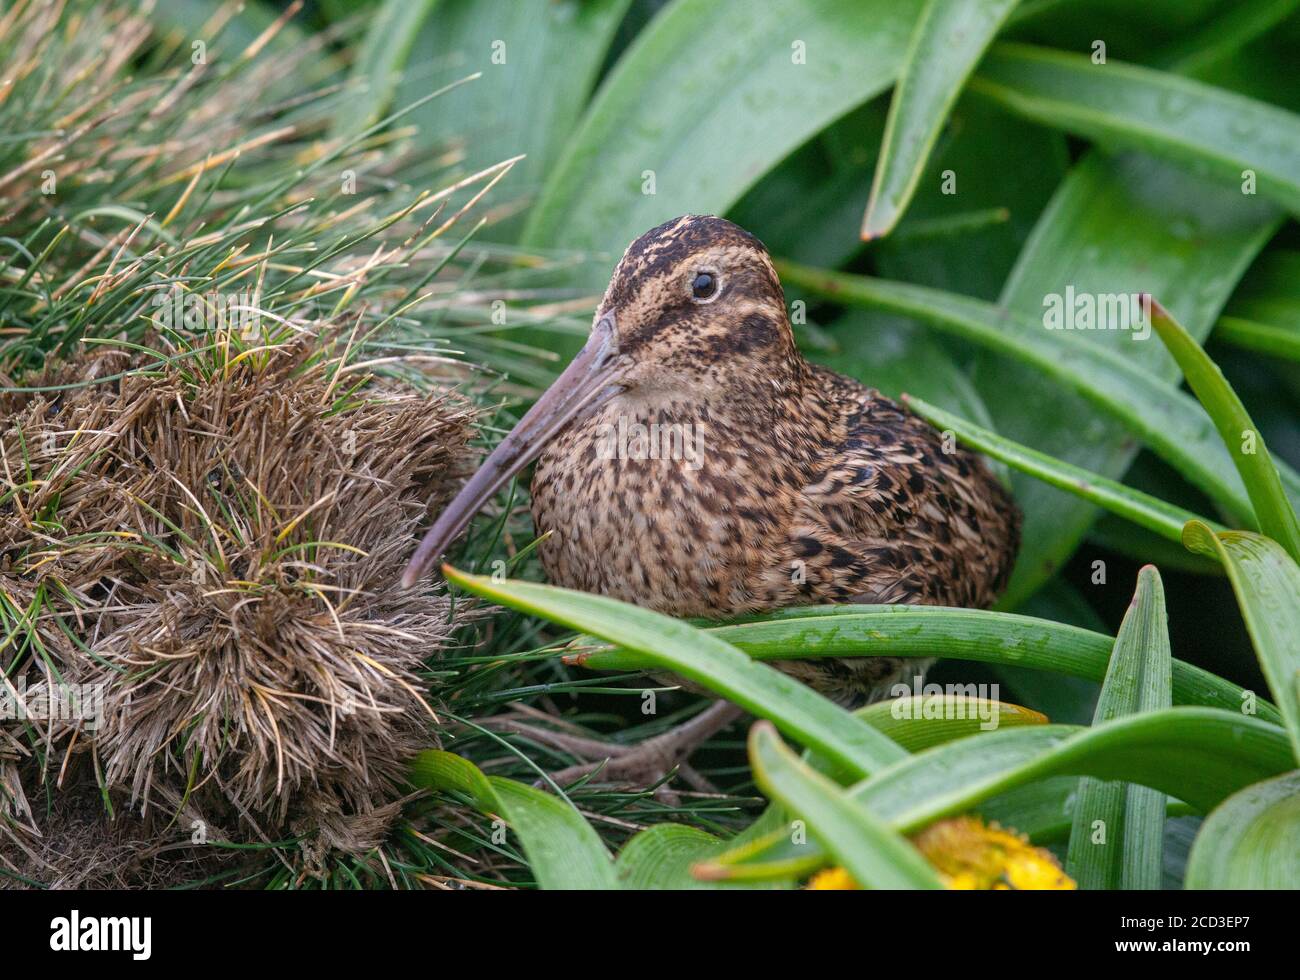 Sub-Antarctic snipe, Auckland snipe (Coenocorypha aucklandica aucklandica), standing in low arctic vegetation, New Zealand, Auckland islands, Enderby Stock Photo